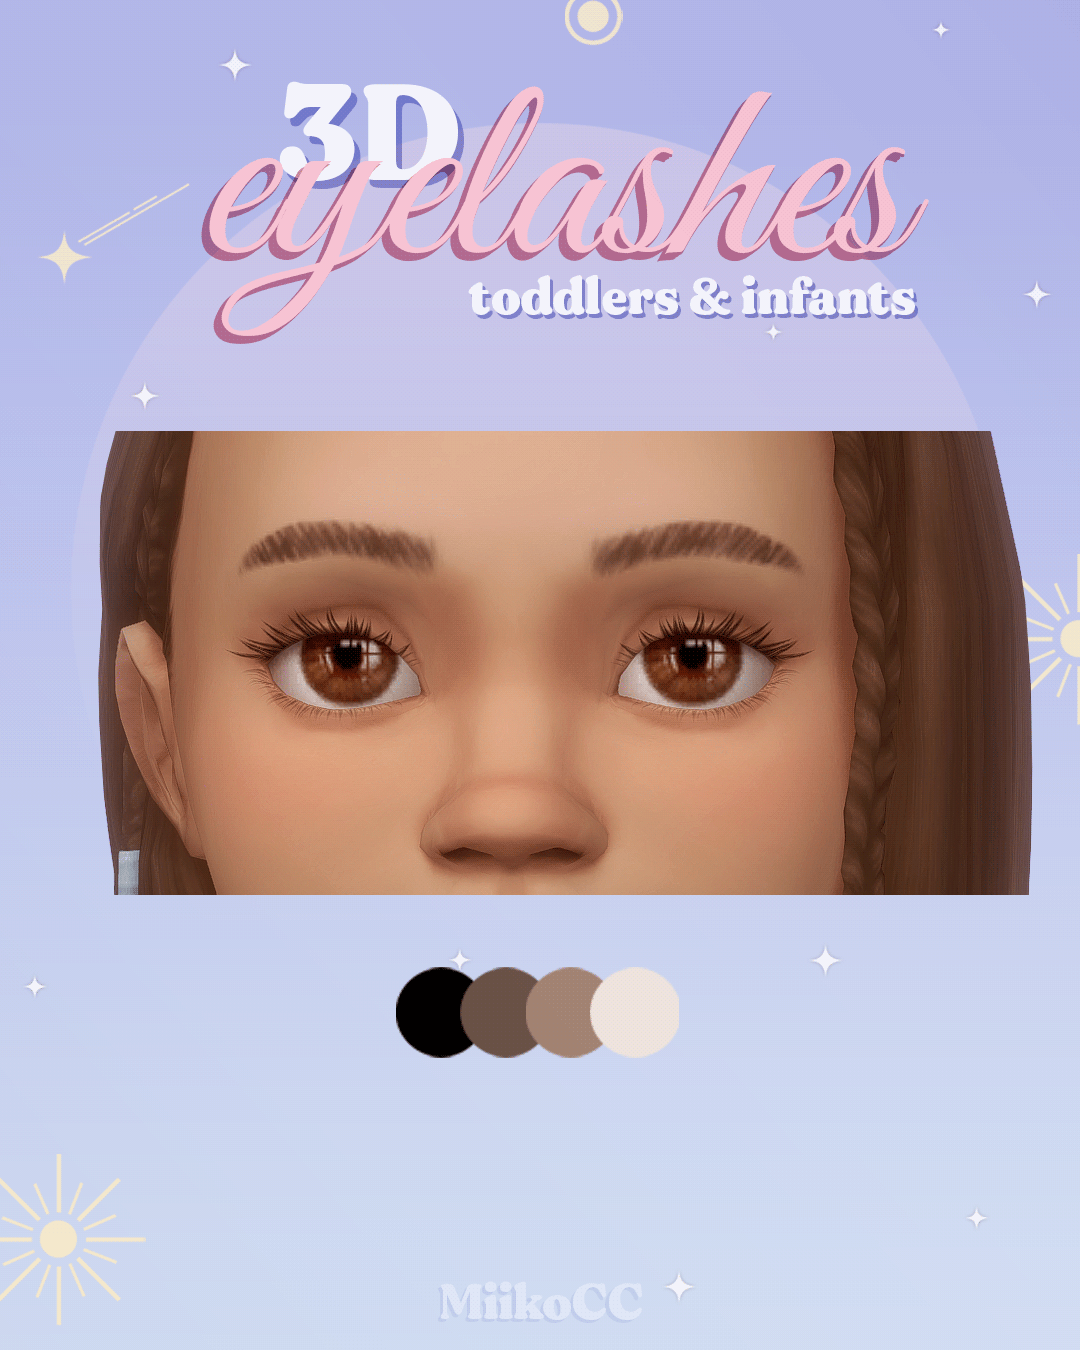 Eyelashes for babies and toddlers Sims4 addon